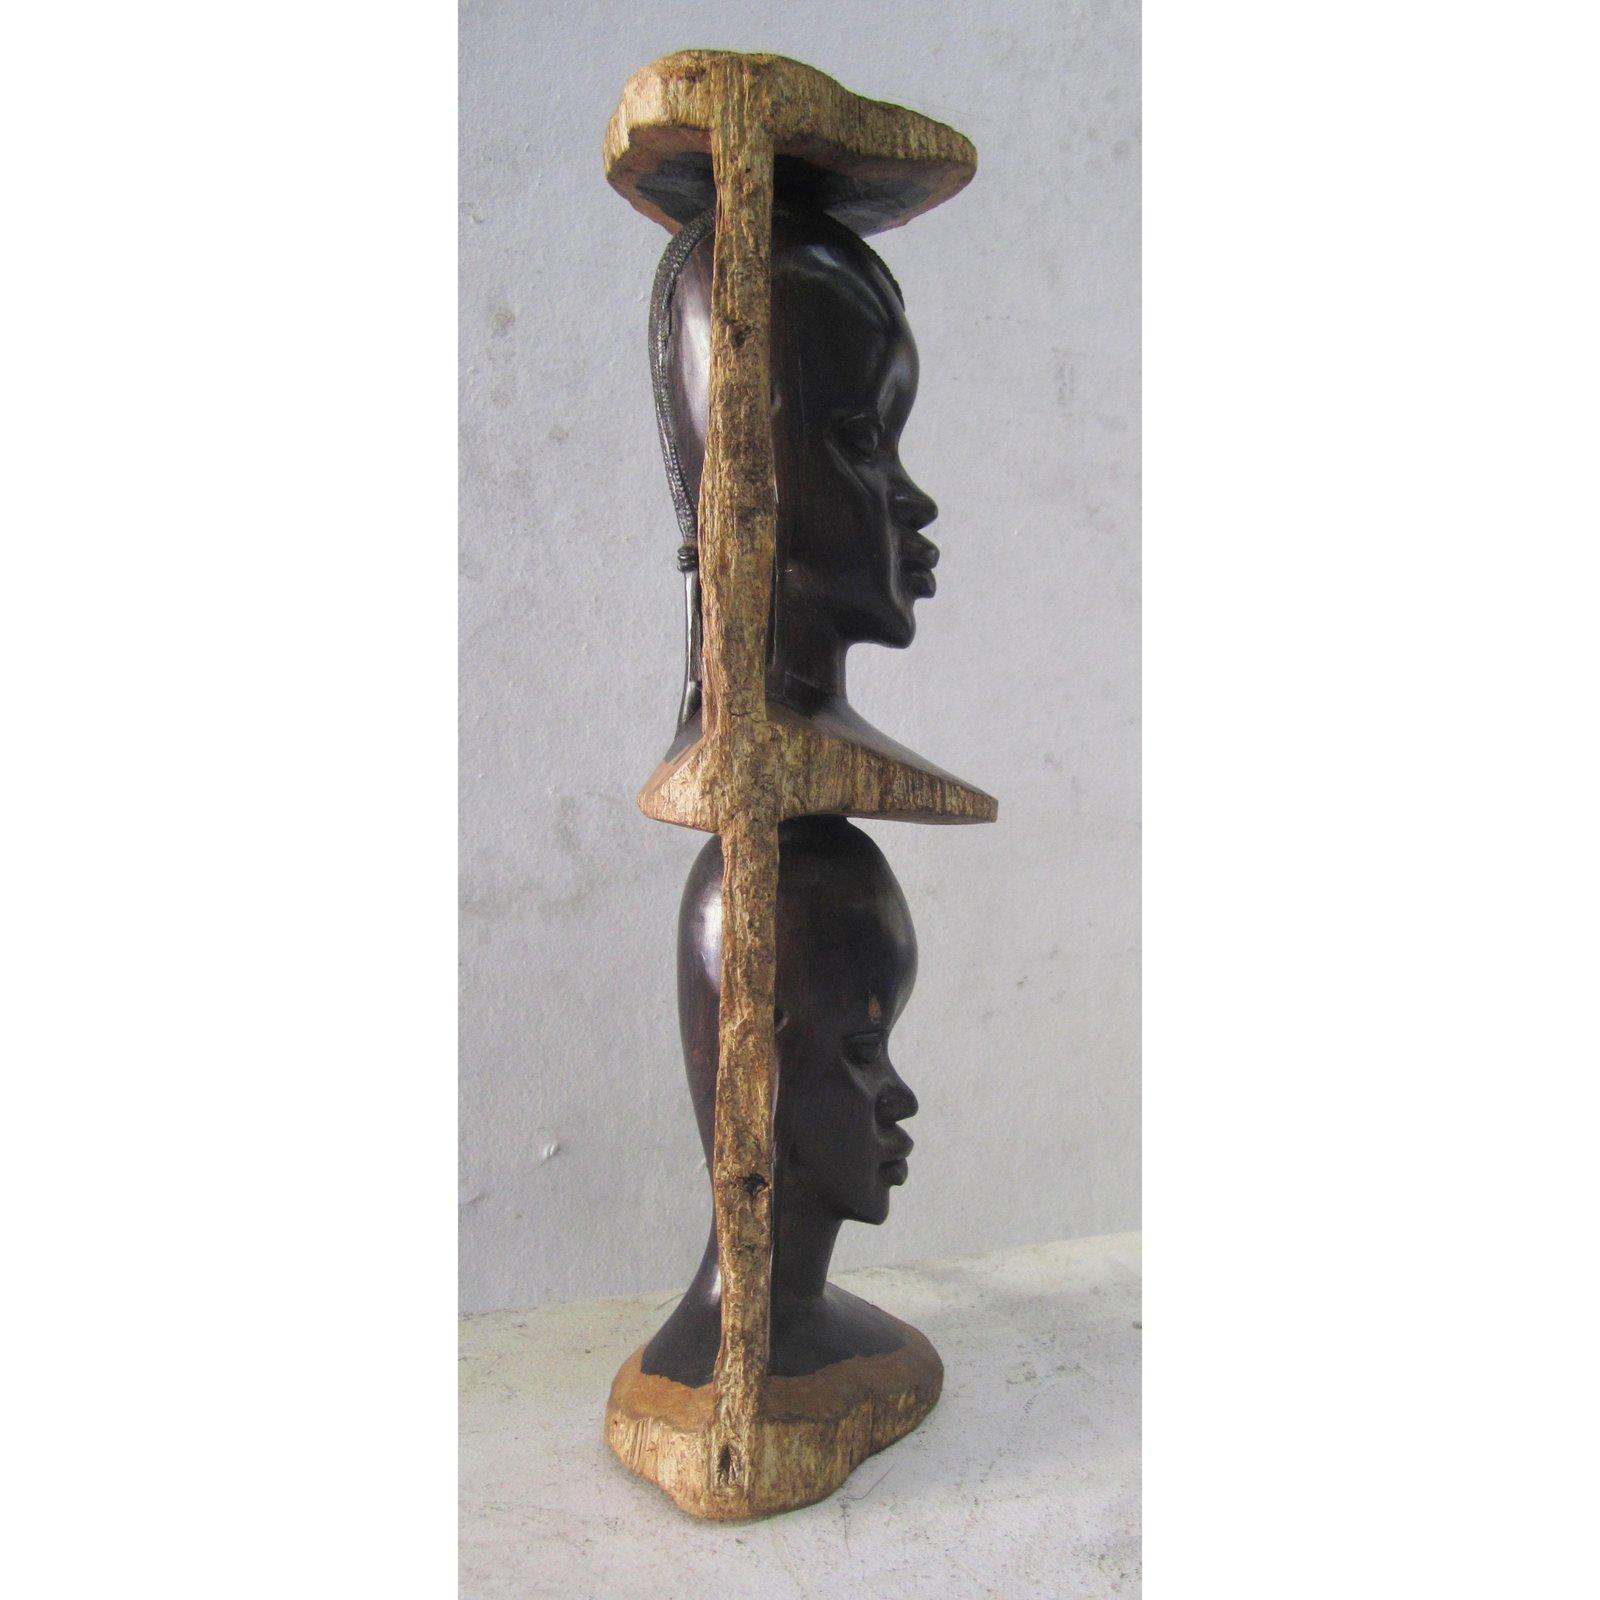 This folk TOTEM pole sculpture is very finely carved in one chunk of ebony. A beautiful African piece that will be the focal point of your living space.